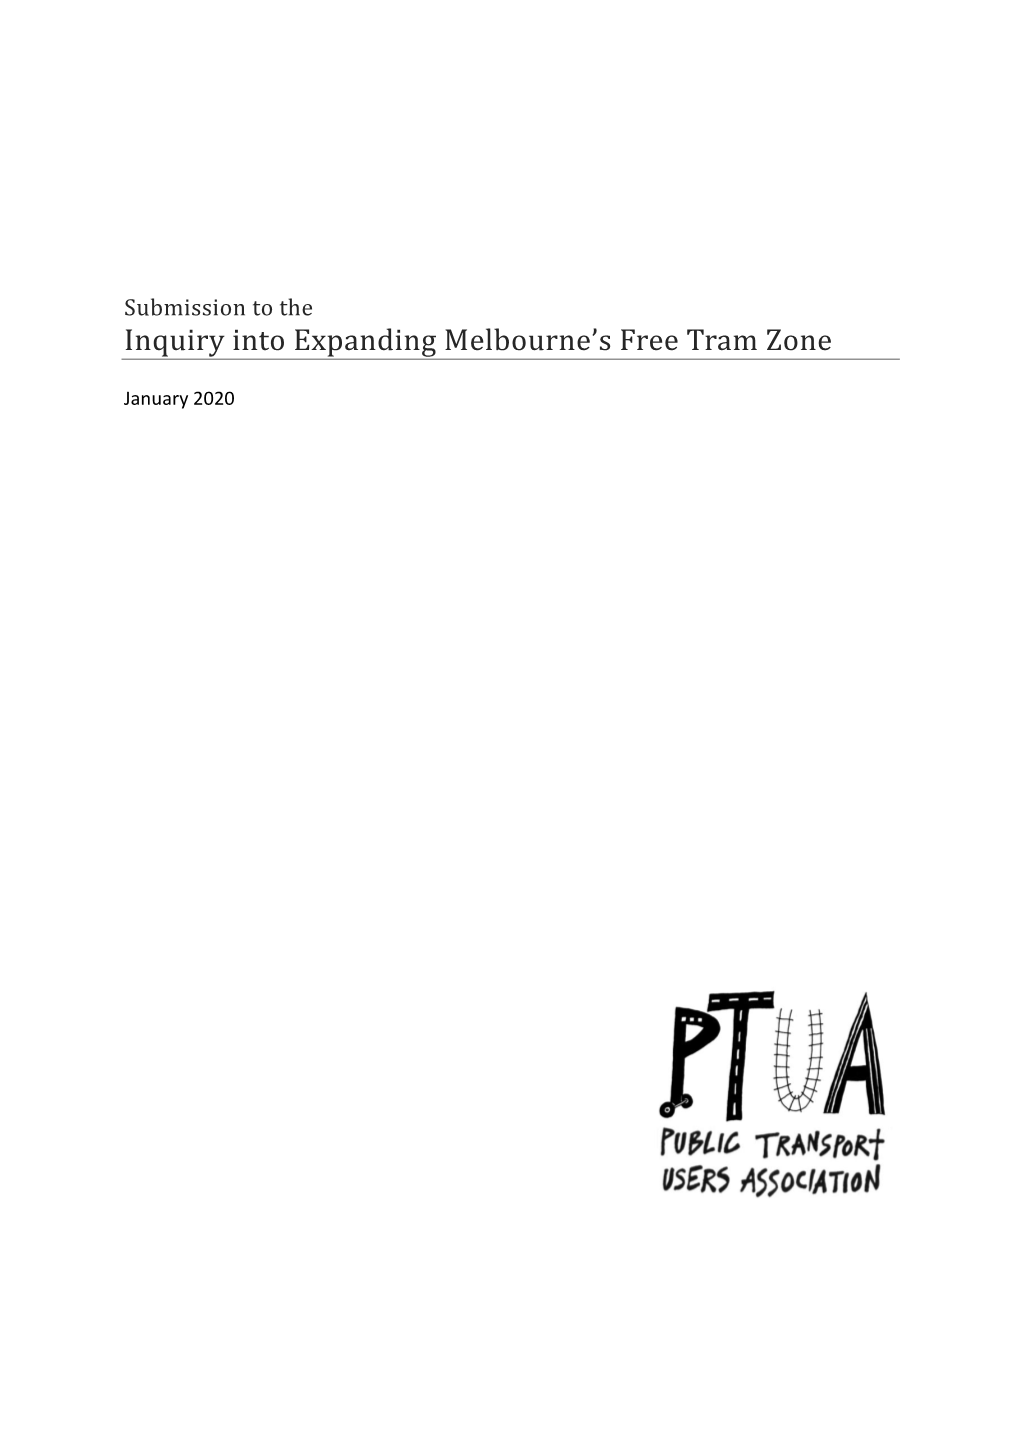 Inquiry Into Expanding Melbourne's Free Tram Zone